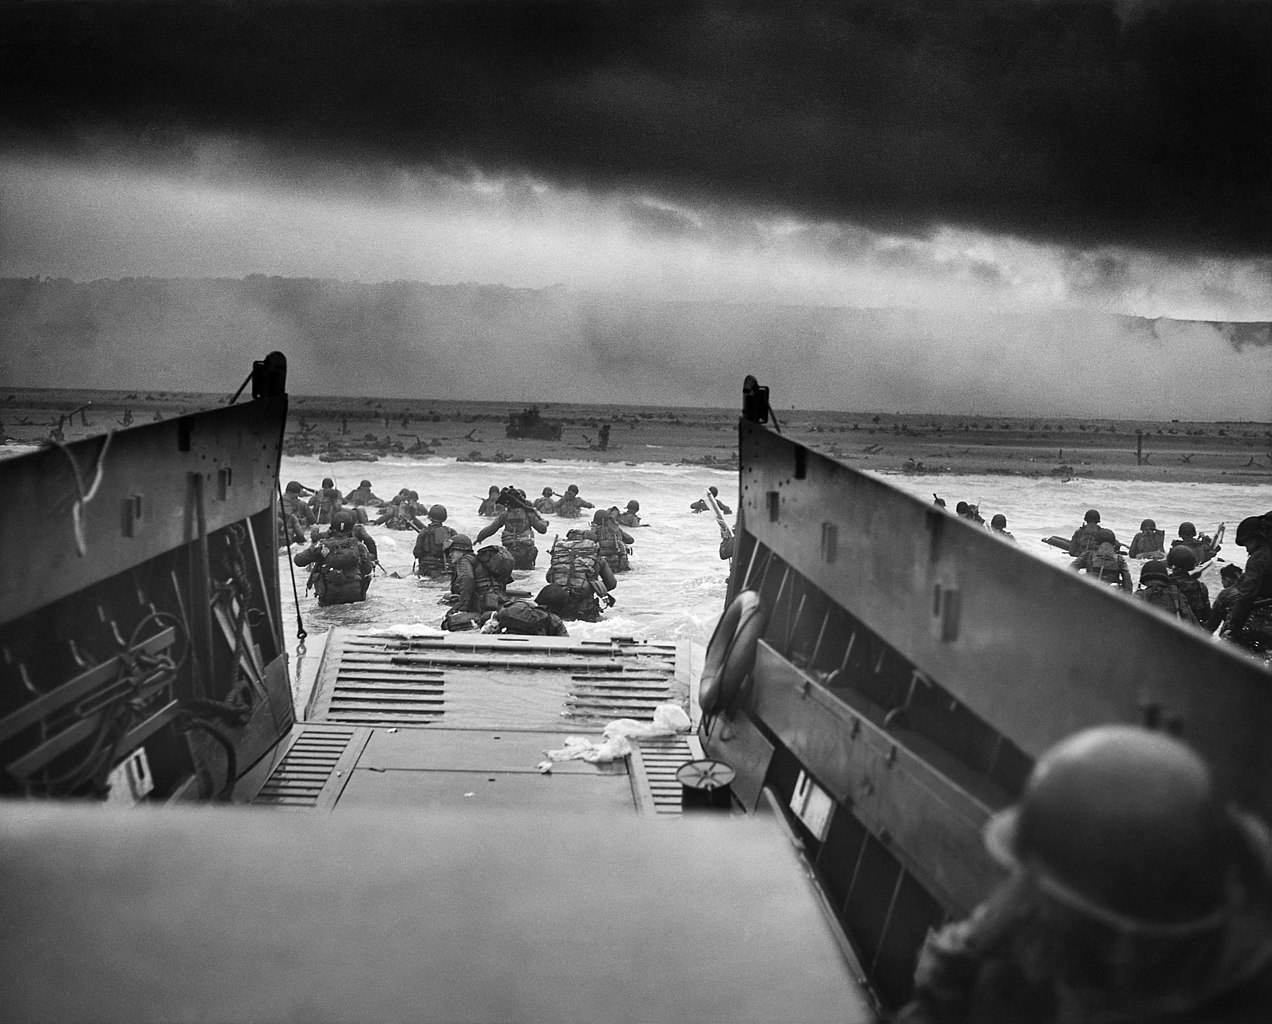 Into the Jaws of Death: Troops from the U.S. 1st Infantry Division landing on Omaha Beach, June 6, 1944. (Robert F. Sargent/National Archives)